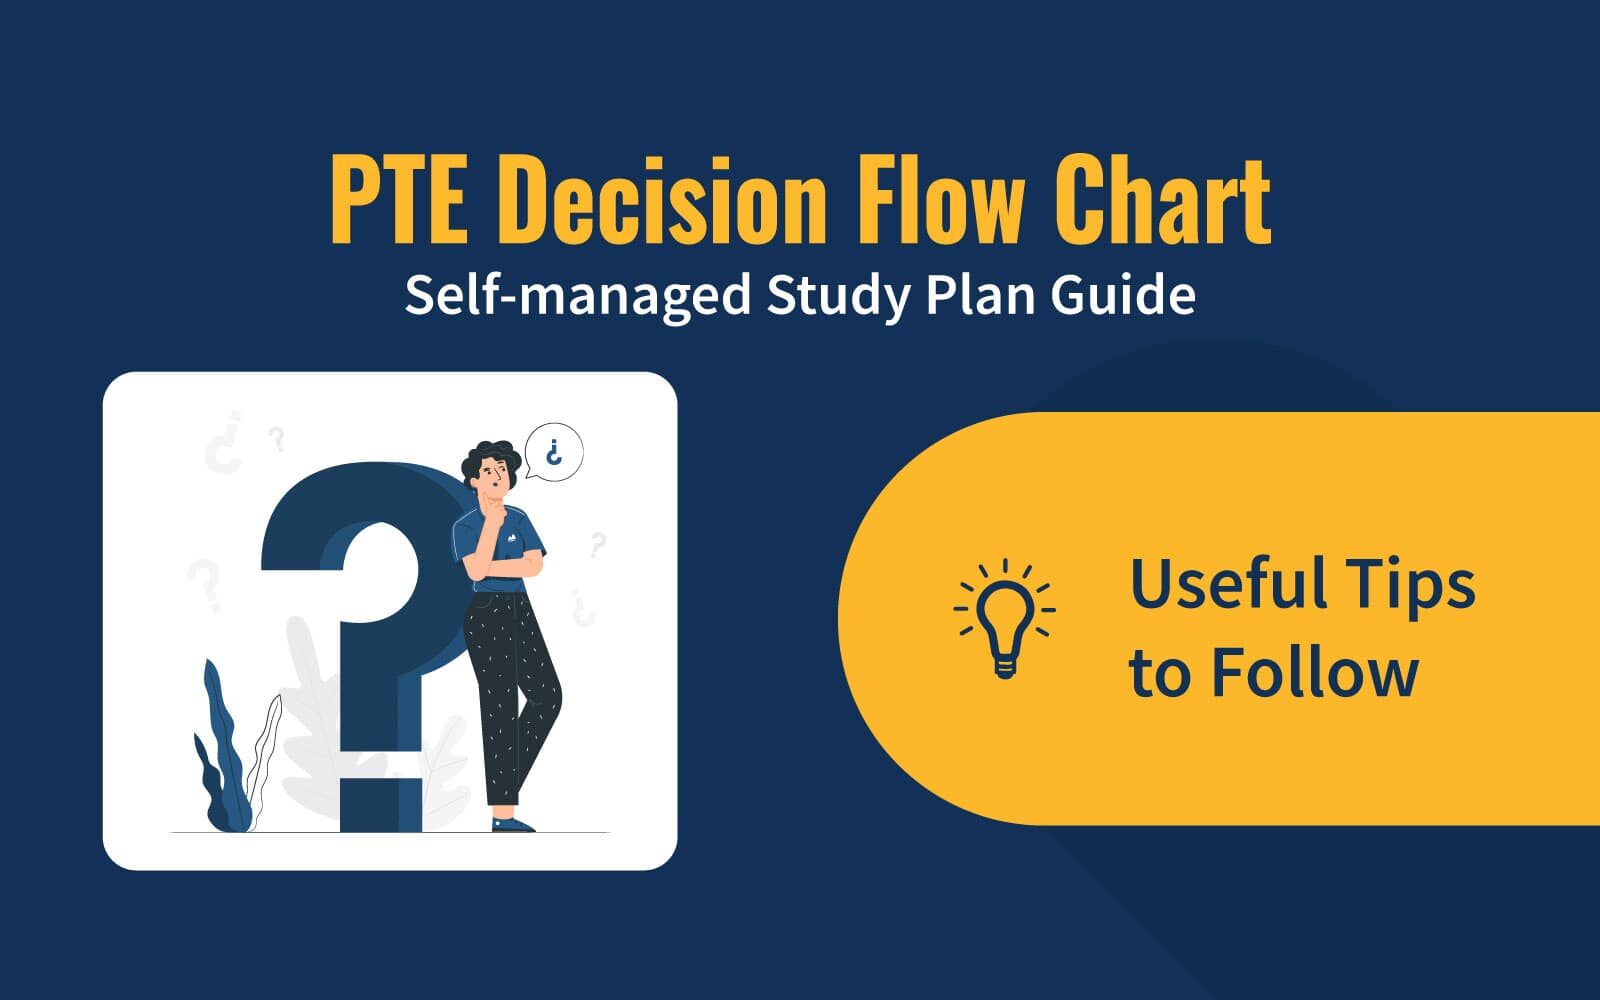 PTE Decision Flow Chart: A Self-managed Study Plan Guide